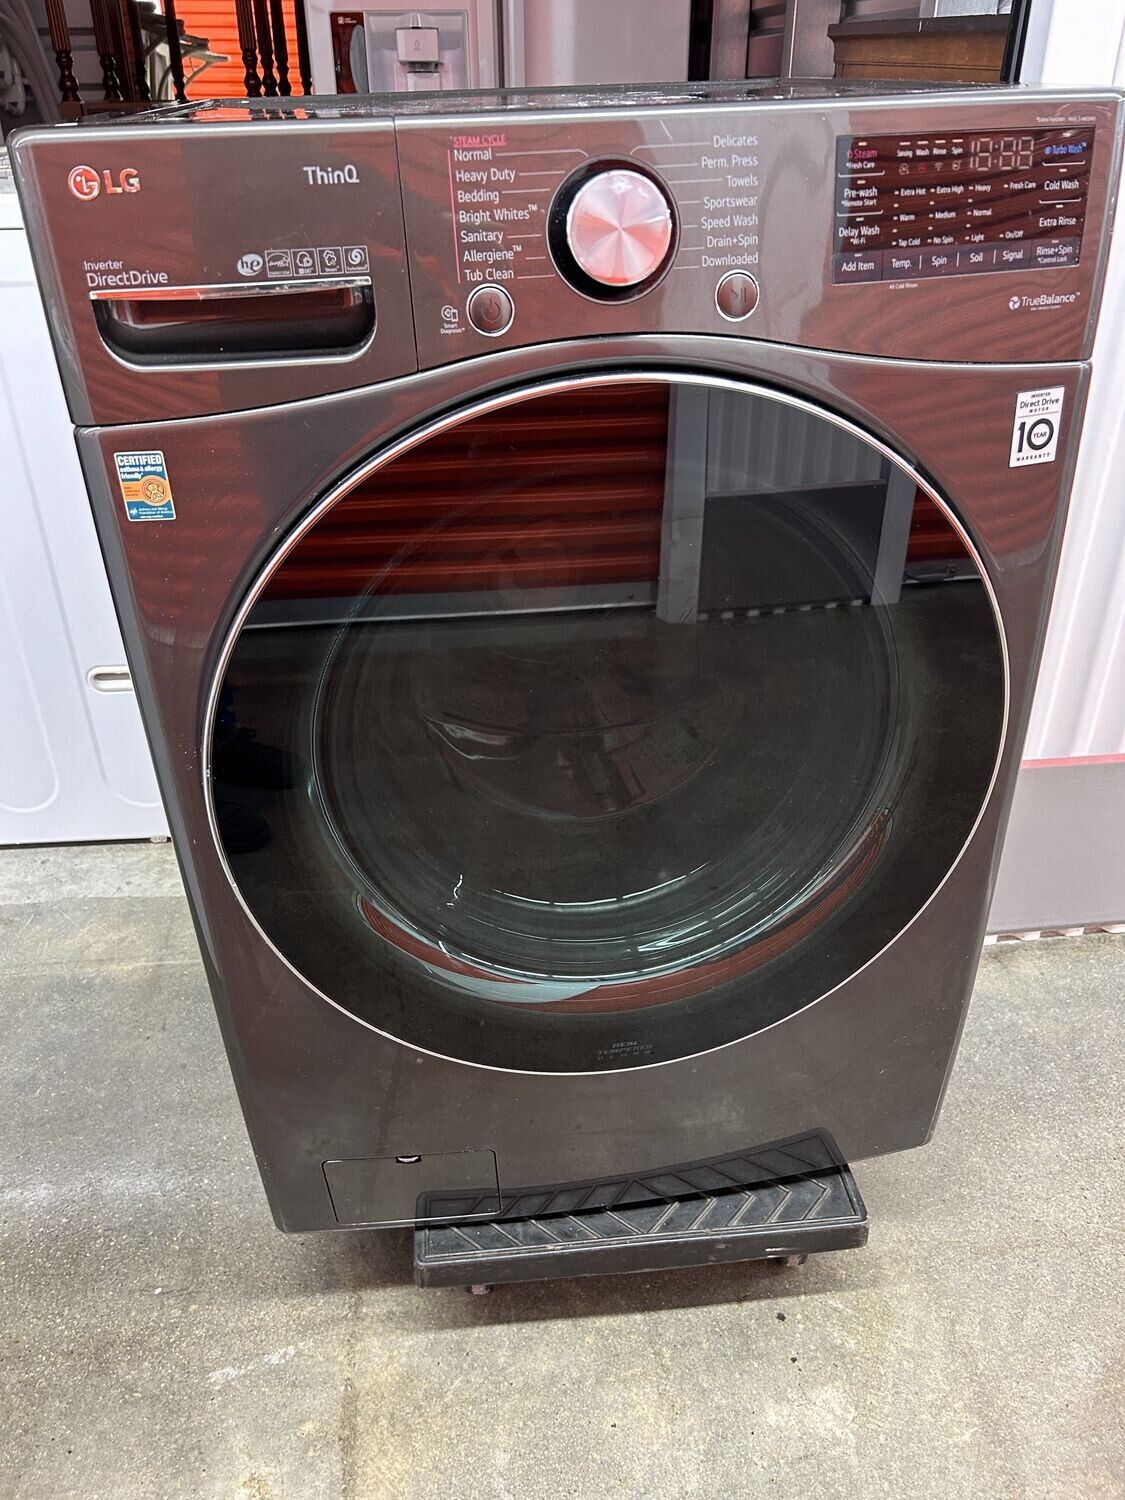 LG Front-load Washer, dark gray, 3 yrs old #1149 ** 1 wk to sell, full price